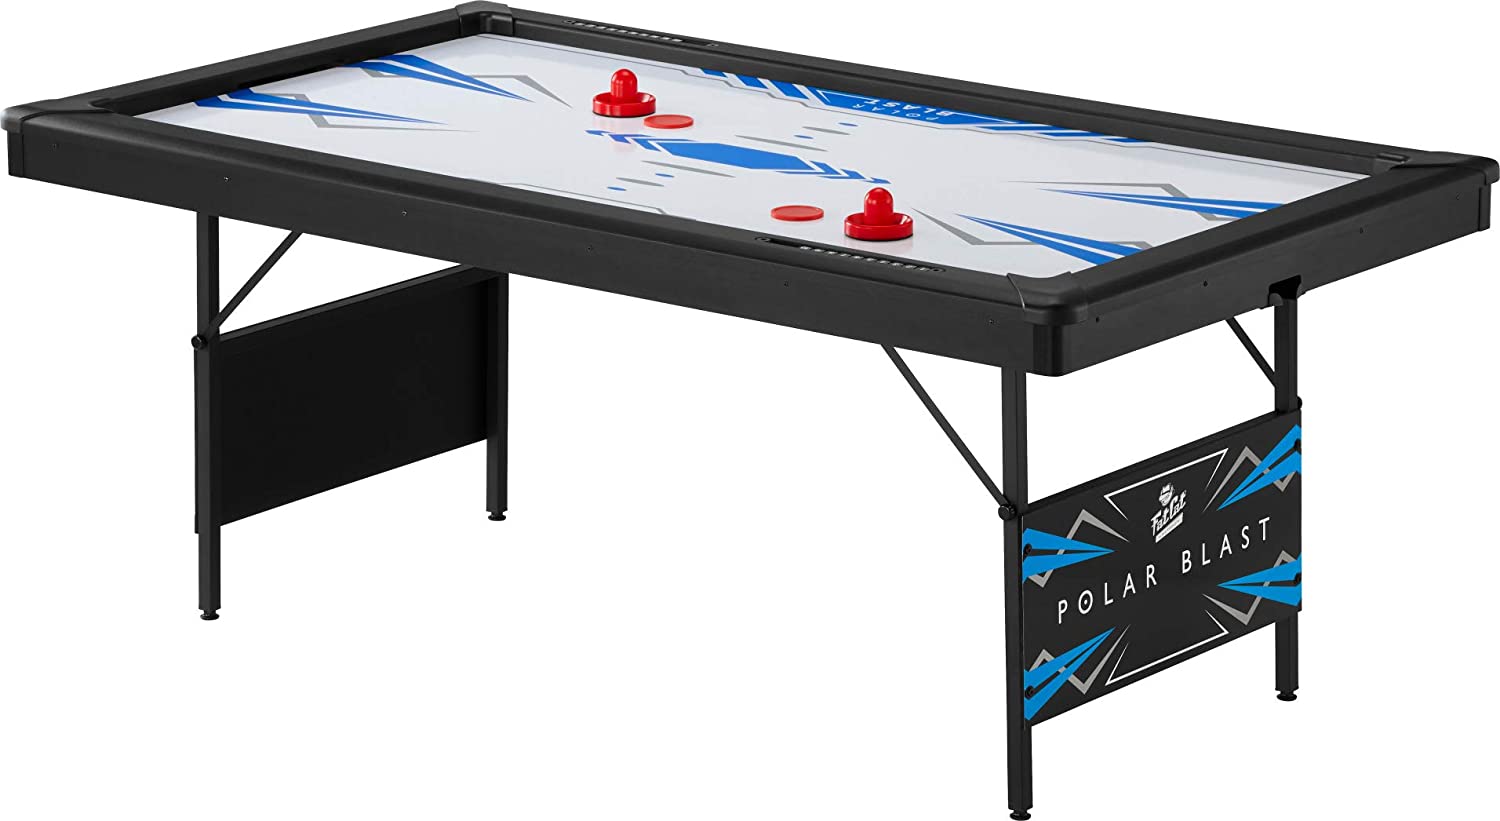 What Makes The Folding Air Hockey Table Stand Out From Other Models Of Air Hockey Tables?